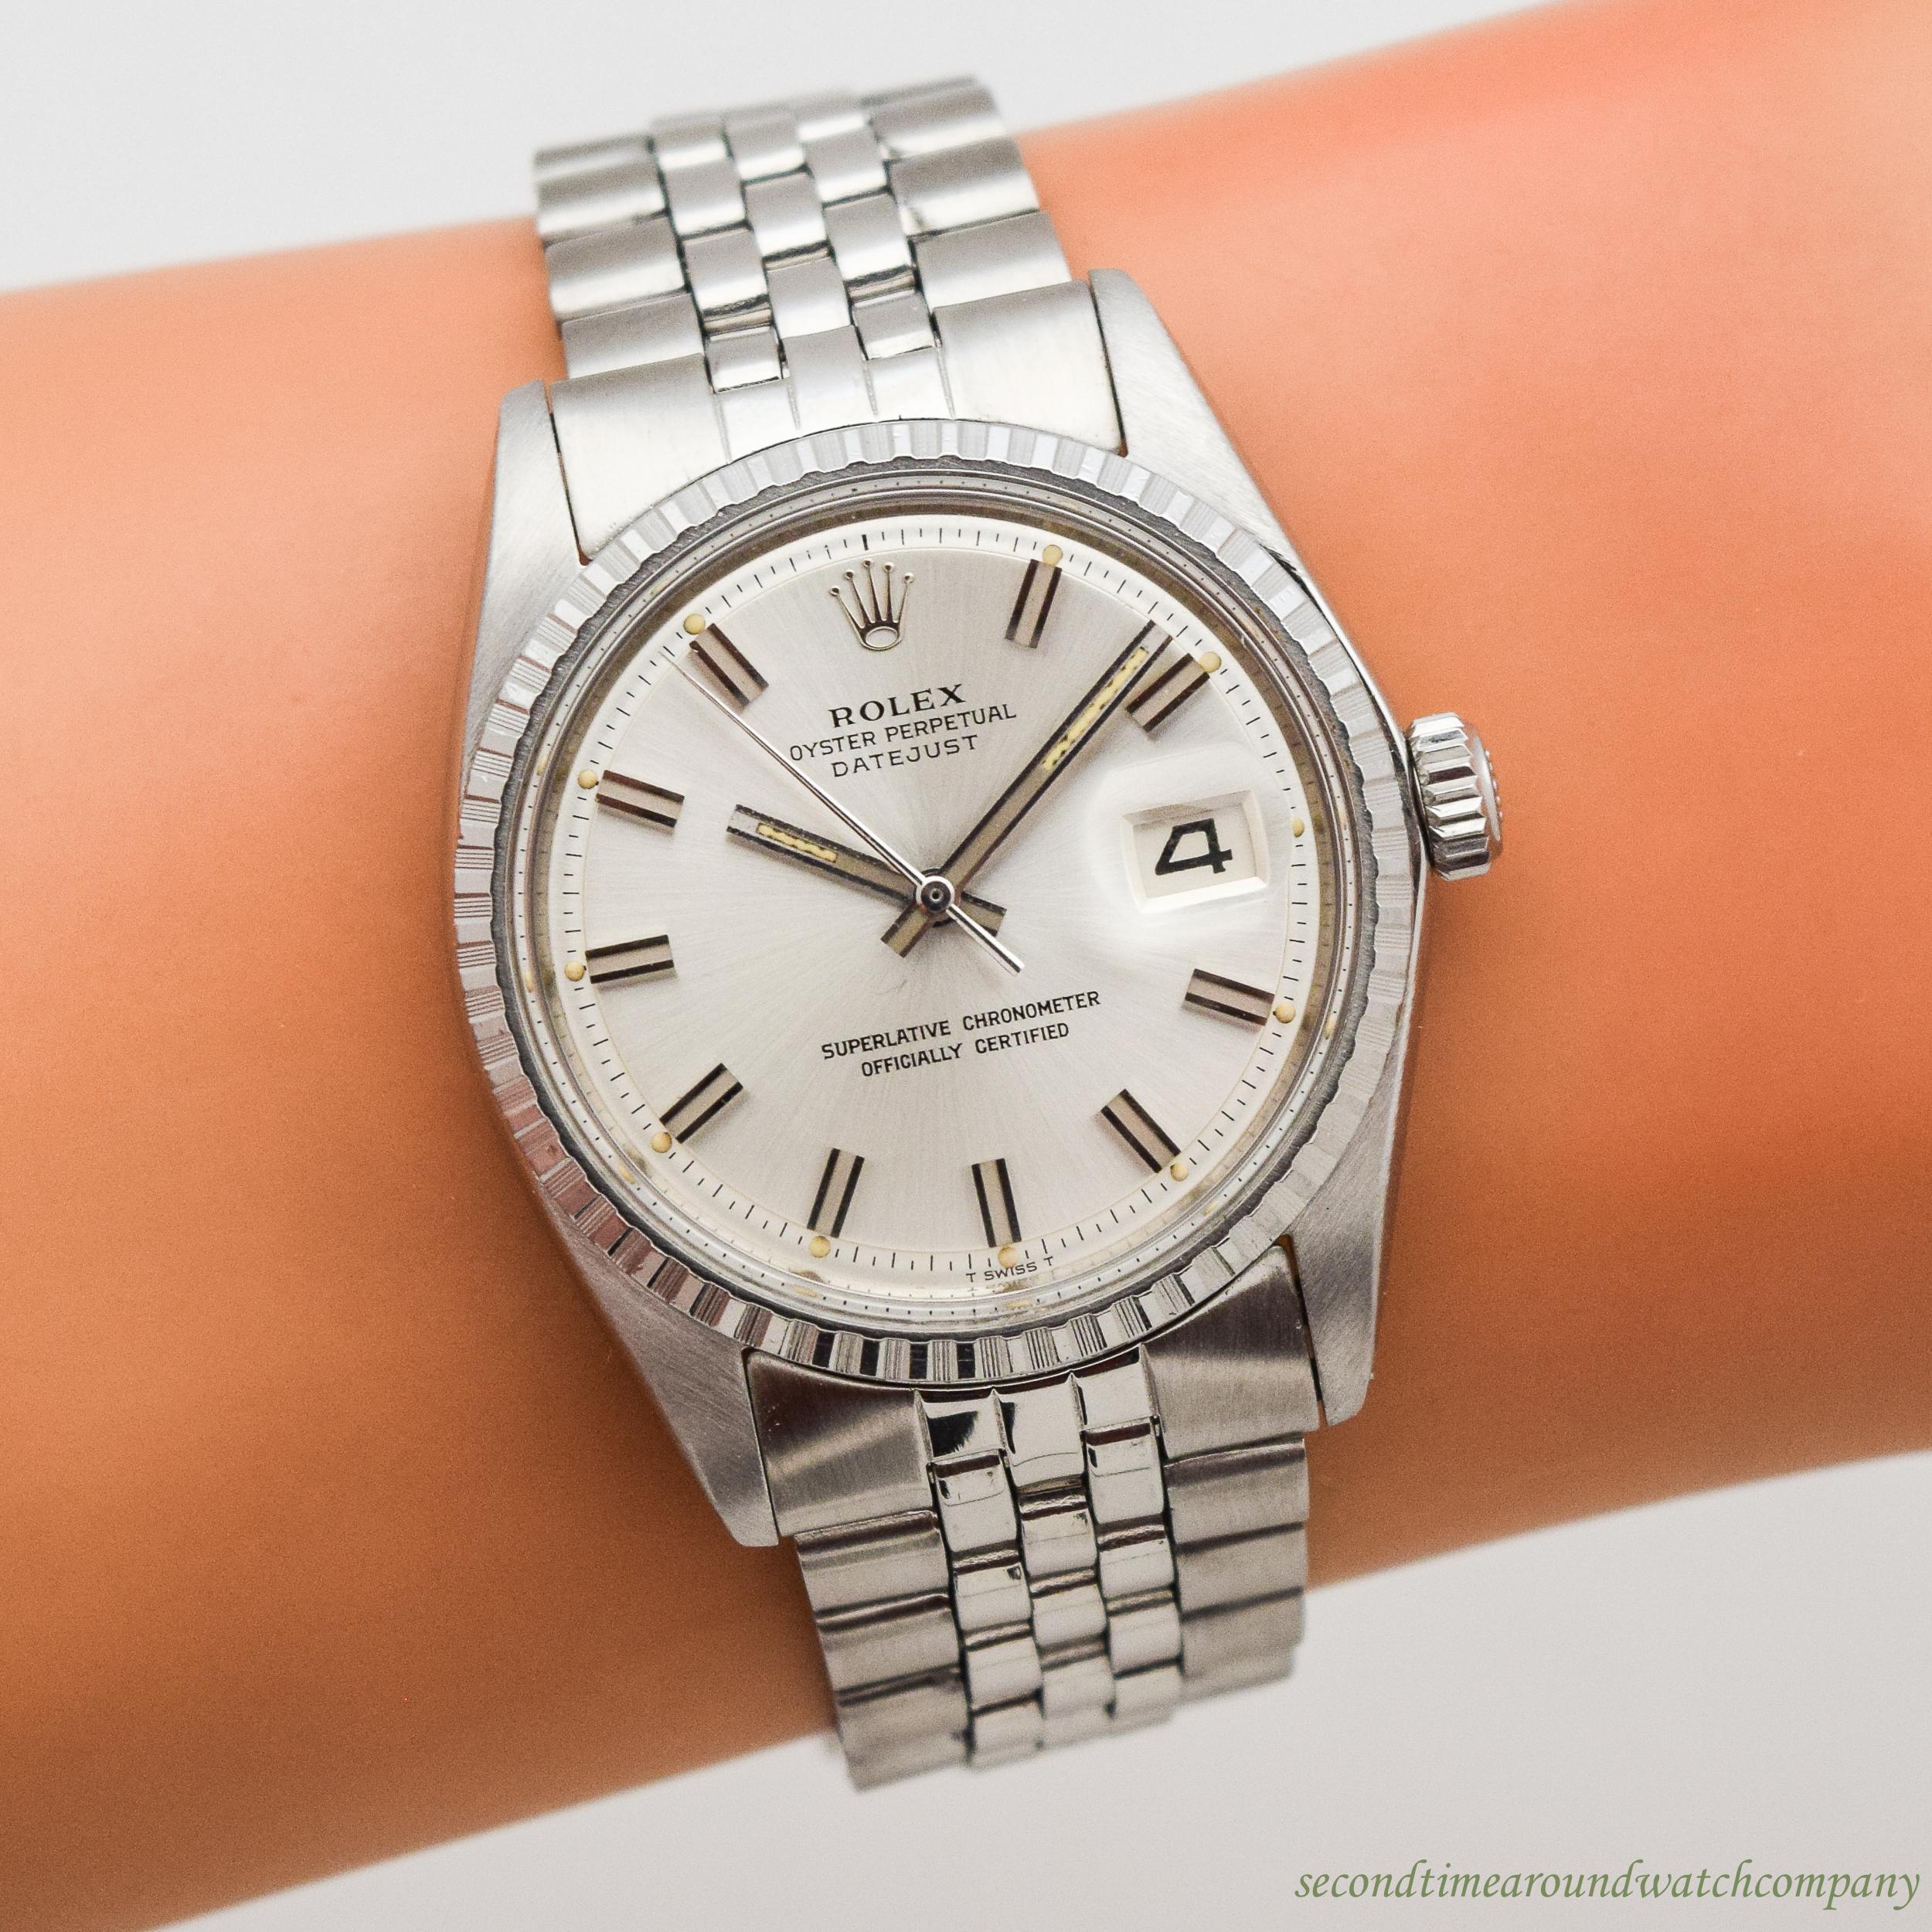 Vintage Rolex Datejust Reference 1603 Stainless Steel Watch, 1970 For Sale 3